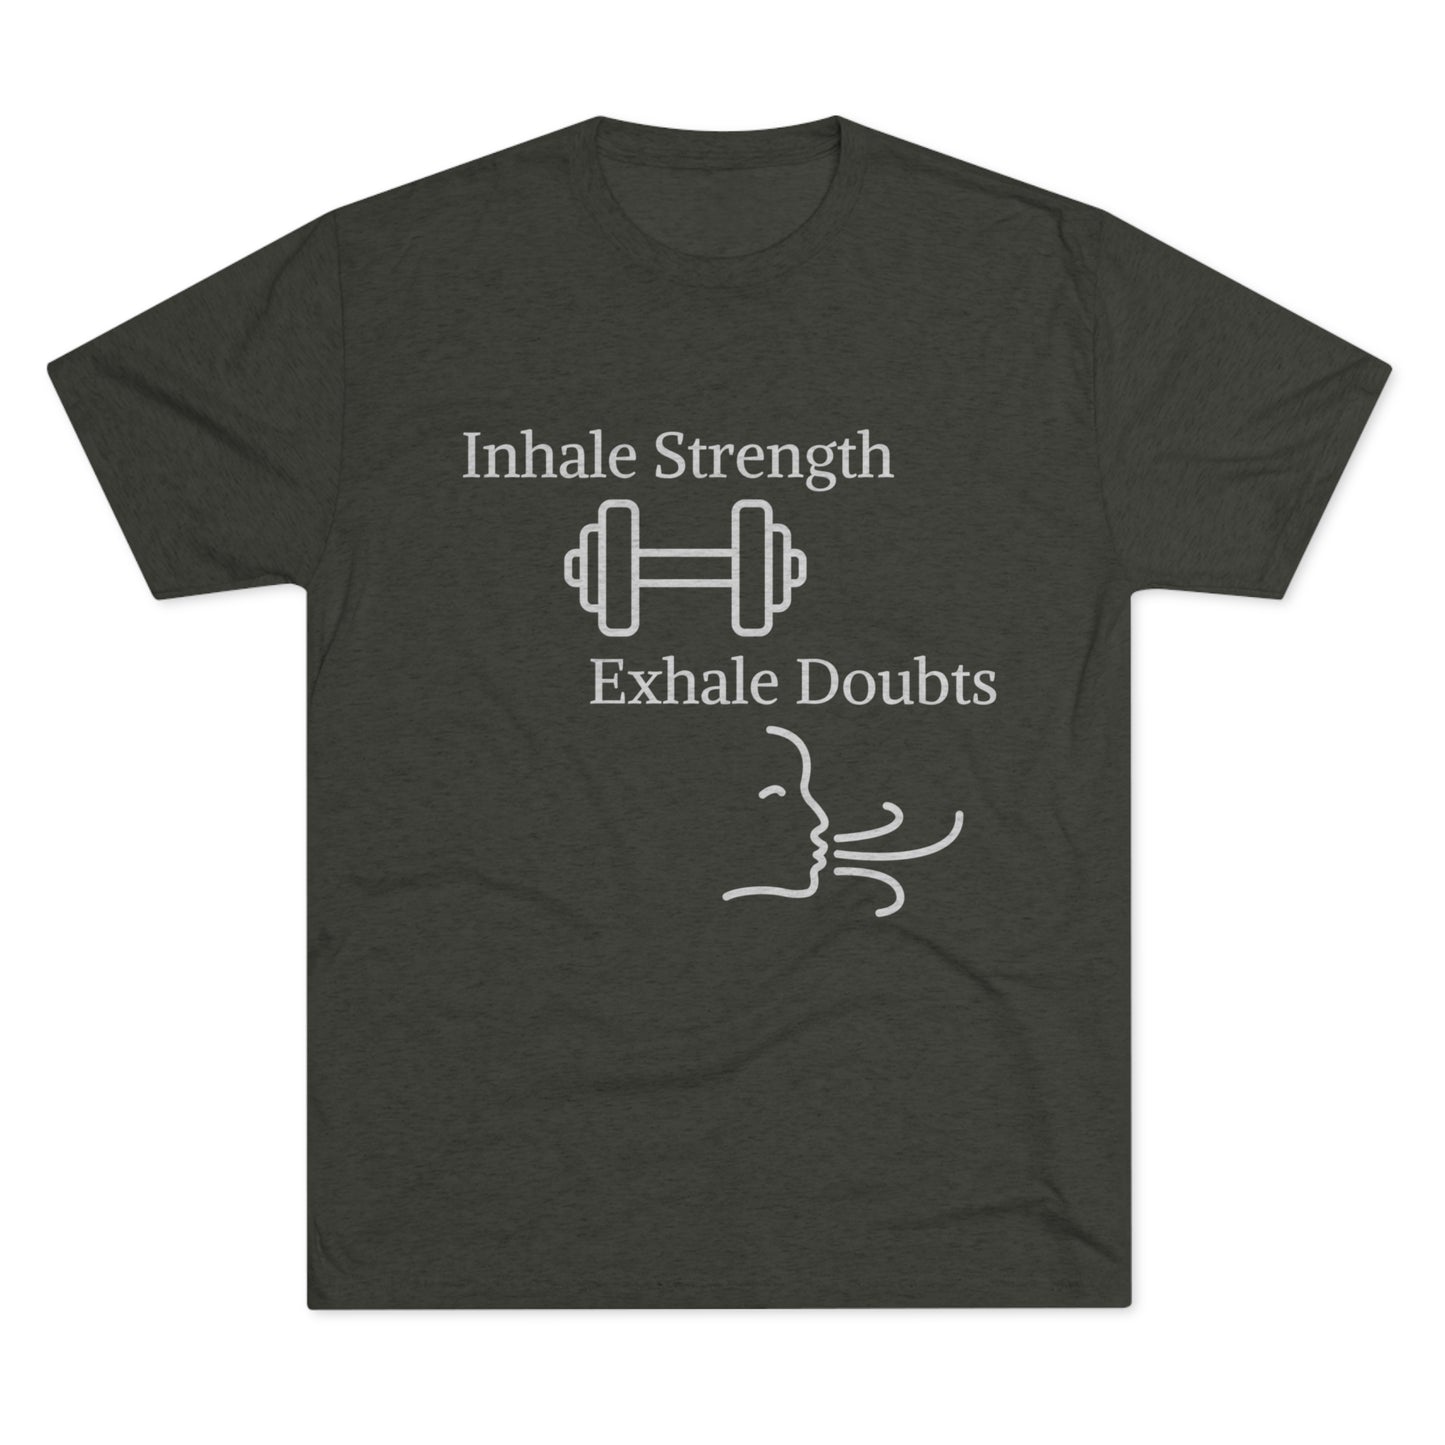 A dark grey motivational T-shirt with the phrase "inhale strength, exhale doubts" printed in white. Above the text is a dumbbell icon, and below is a simple line drawing of ex. Check out the Inhale Strength Exhale Doubt w Images - Unisex Tri-Blend Crew Tee by Printify!